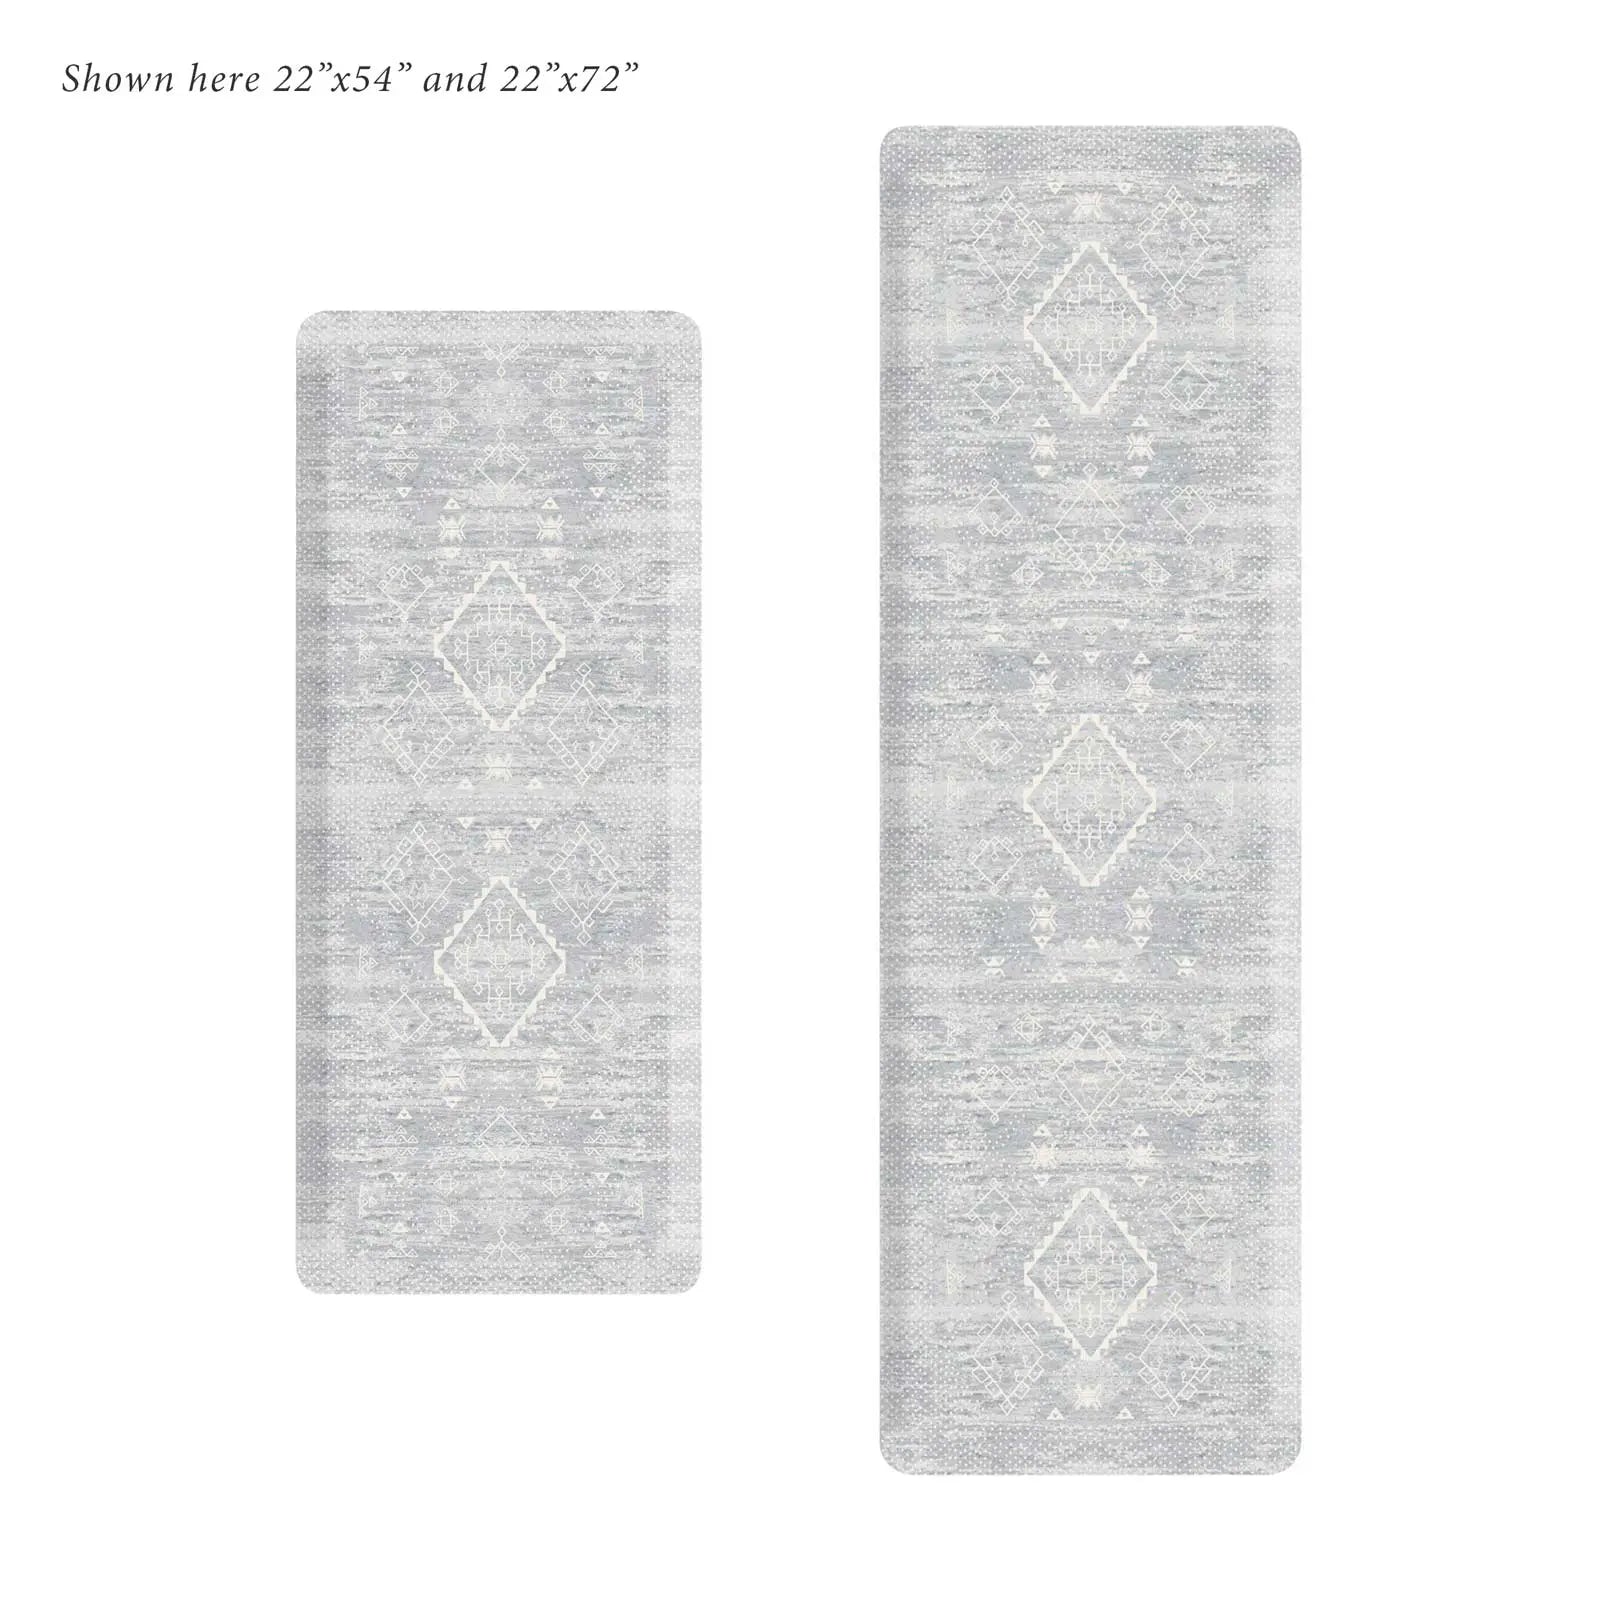 Ula gray and white Minimal Boho Pattern Standing Mat shown in sizes 22x54 and 22x54